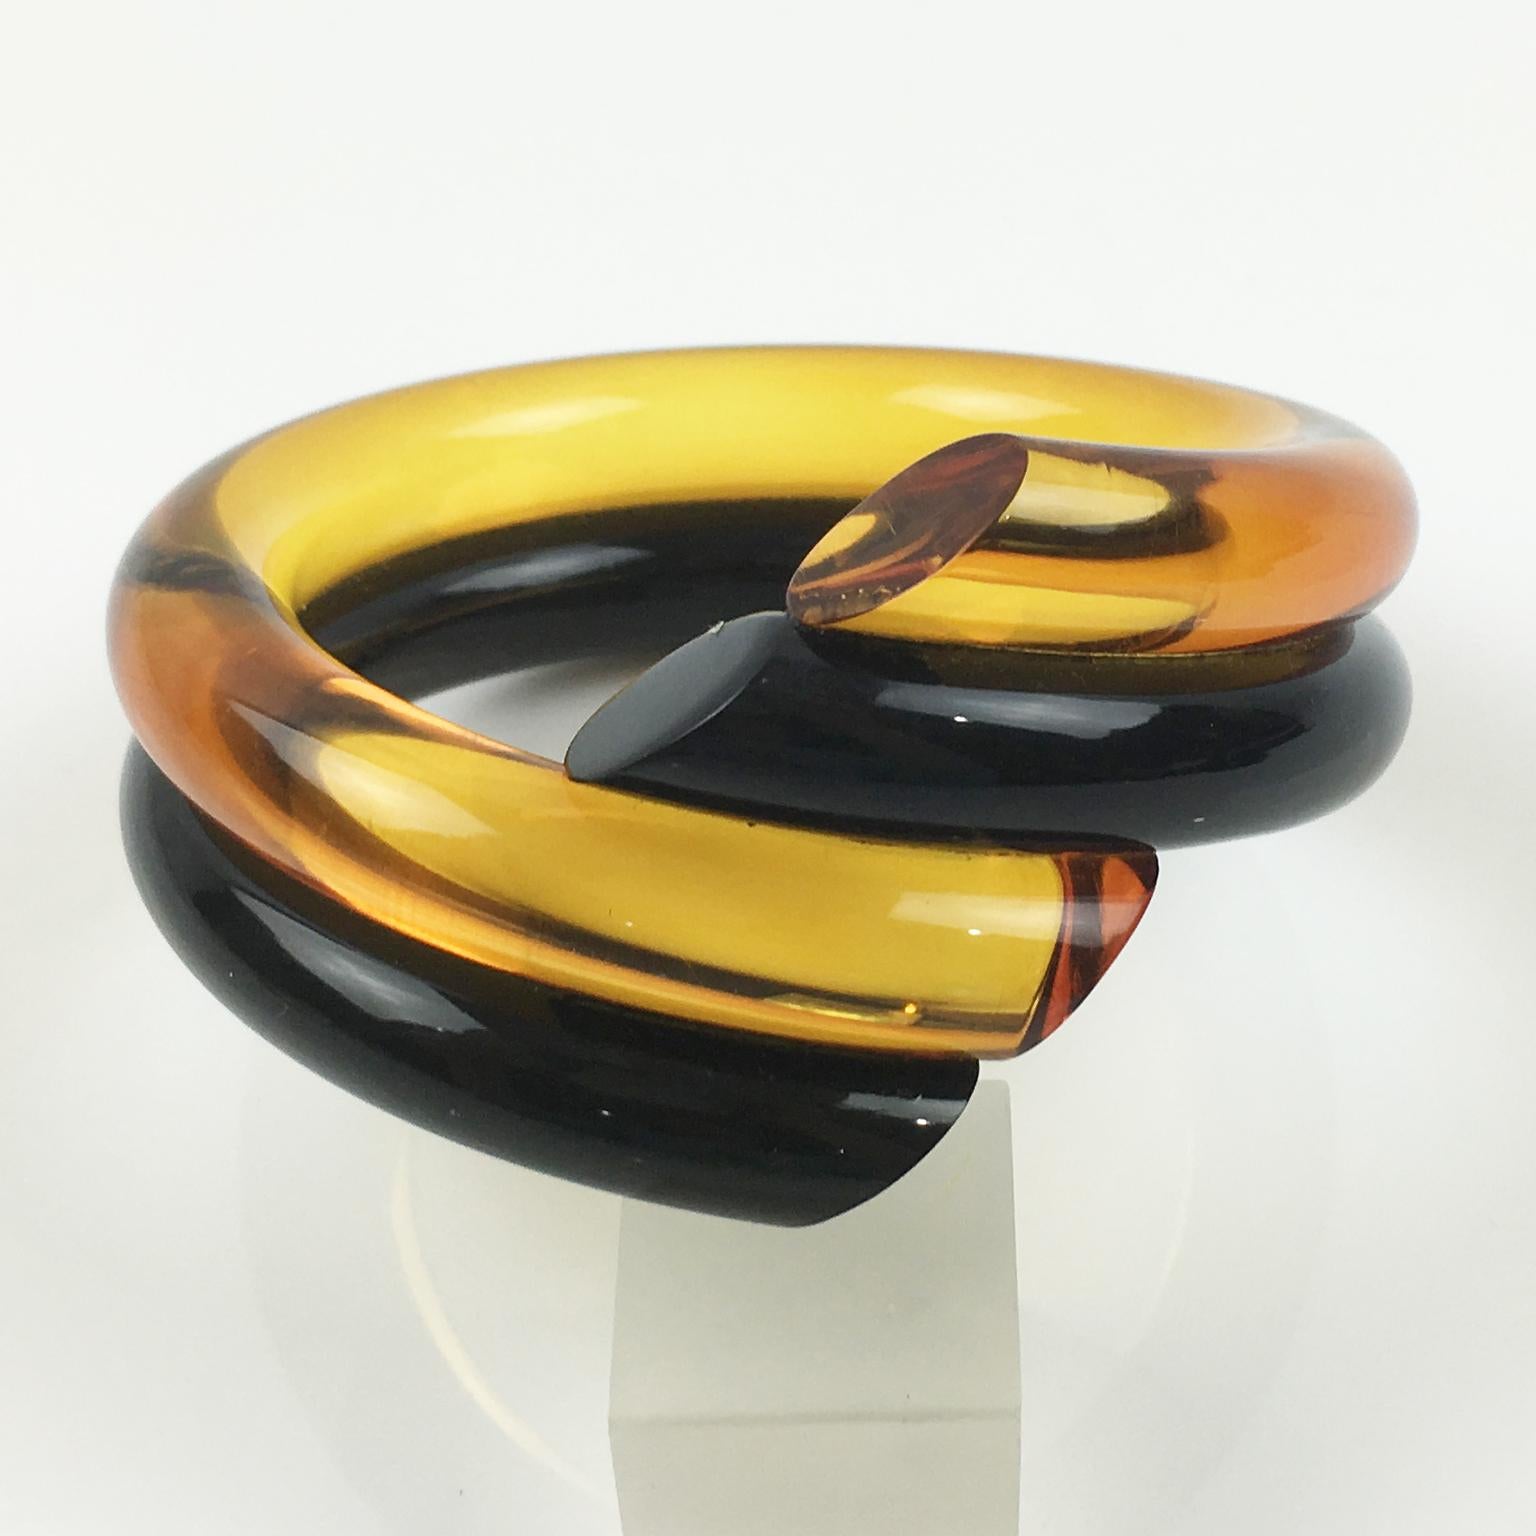 Elegant 1980s Judith Hendler Lucite or Acrylic bracelet bangle. This bracelet is transparent orange and black with coiled design. Judith Hendler is a designer from the 1980s. She created stylish Lucite or acrylic jewelry for high-end stores and